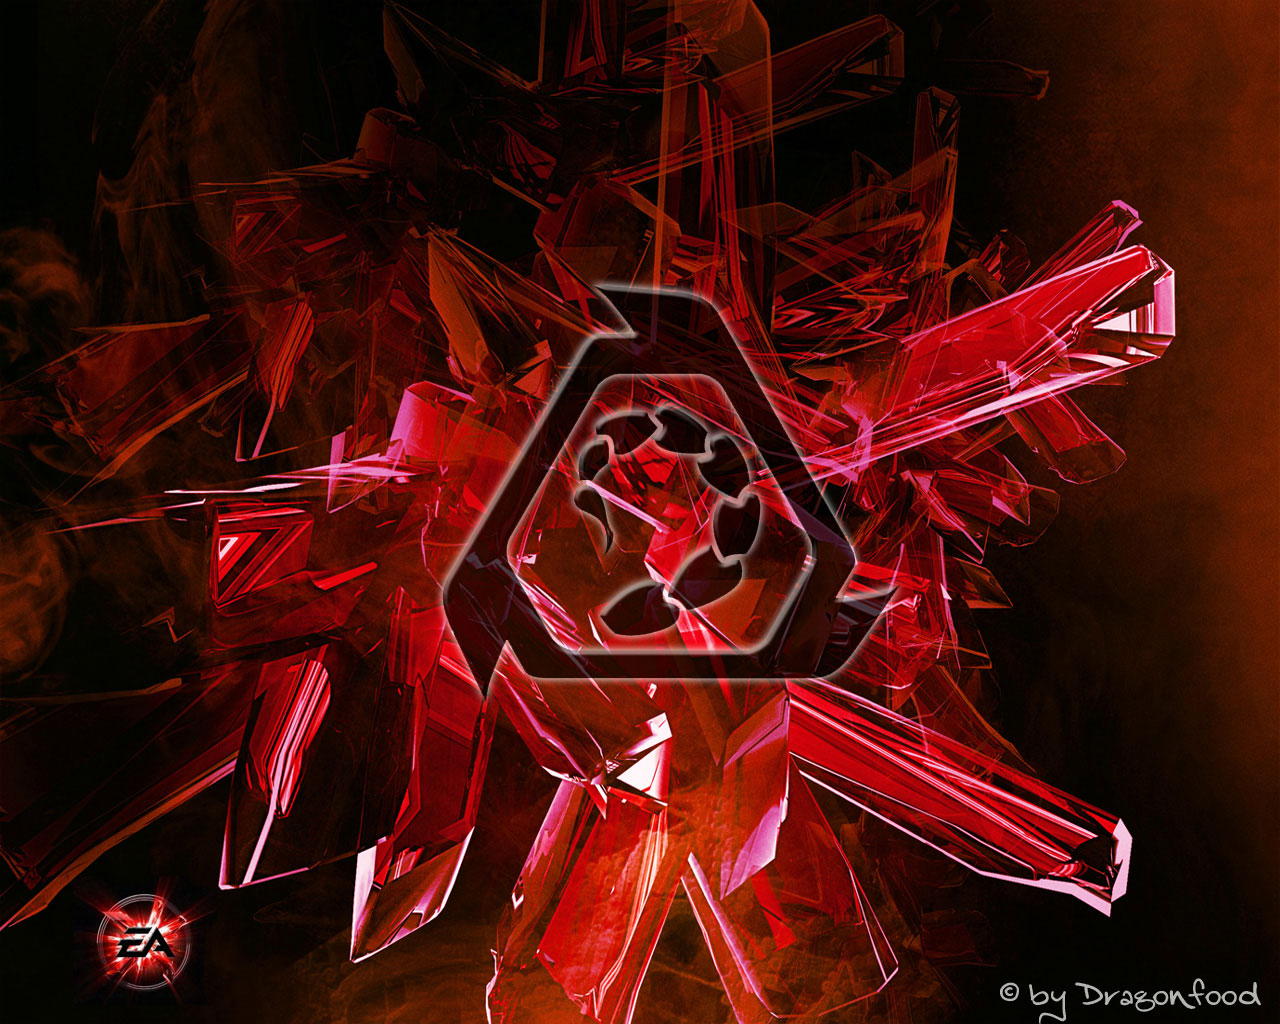 command and conquer wallpaper,red,graphic design,font,graphics,carmine